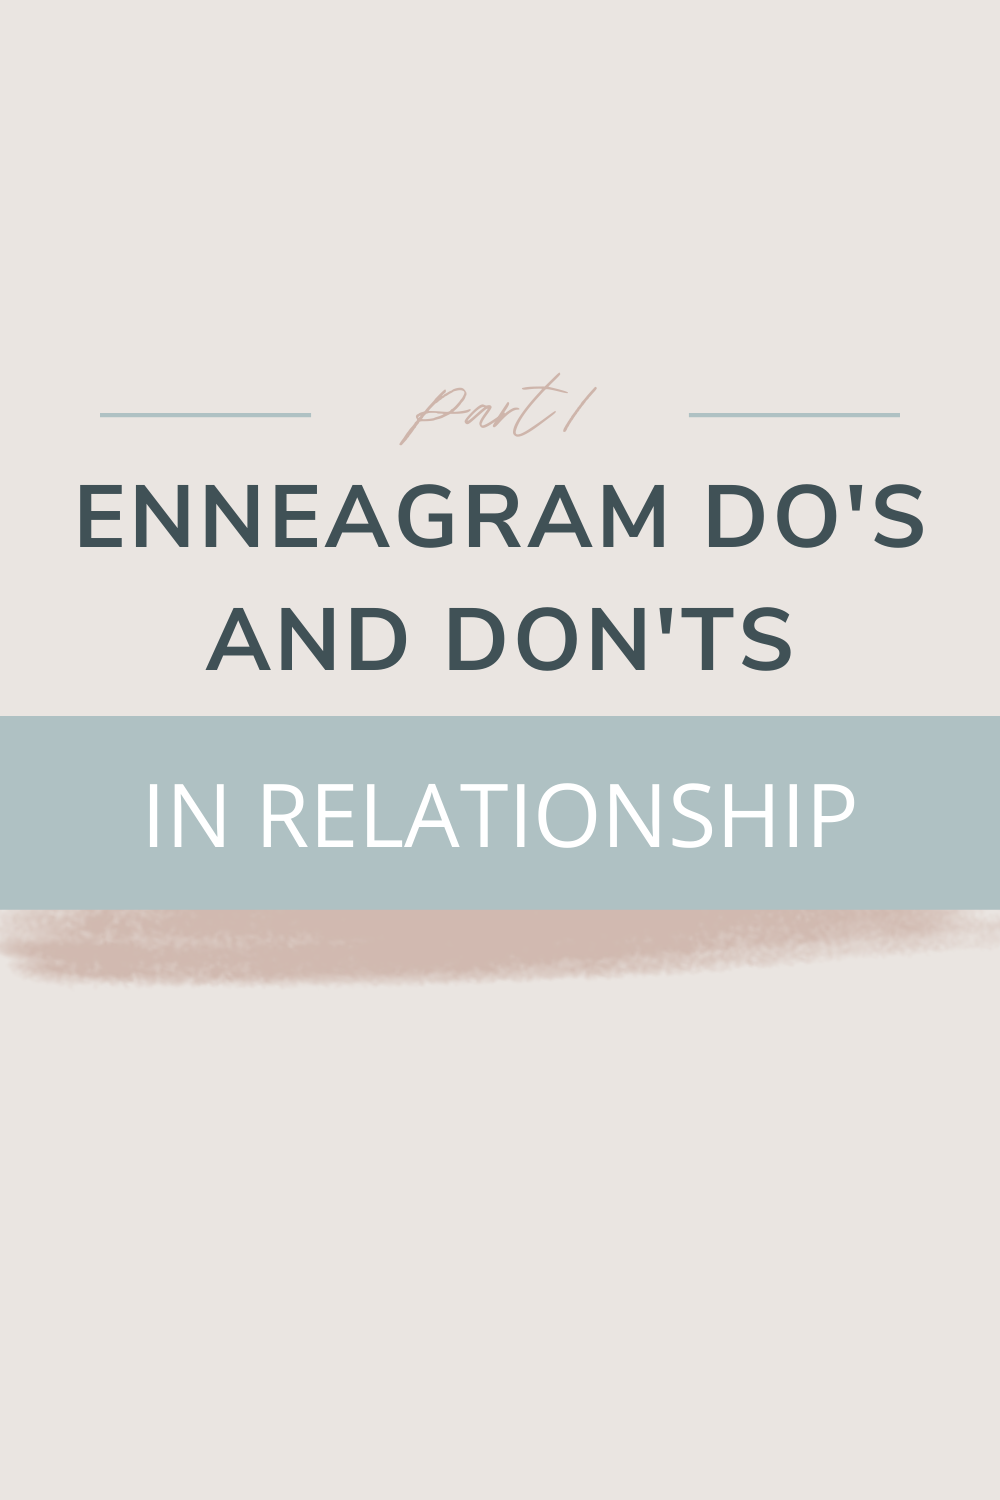 Enneagra Do's and Don'ts in Relationship | Check out our first do/don't in using the Enneagram in your relationship. This blog gives us an overview of the value of the Enneagram, how to get started, and unpacks a key problem with how people talk about the Enneagram. Dig in!